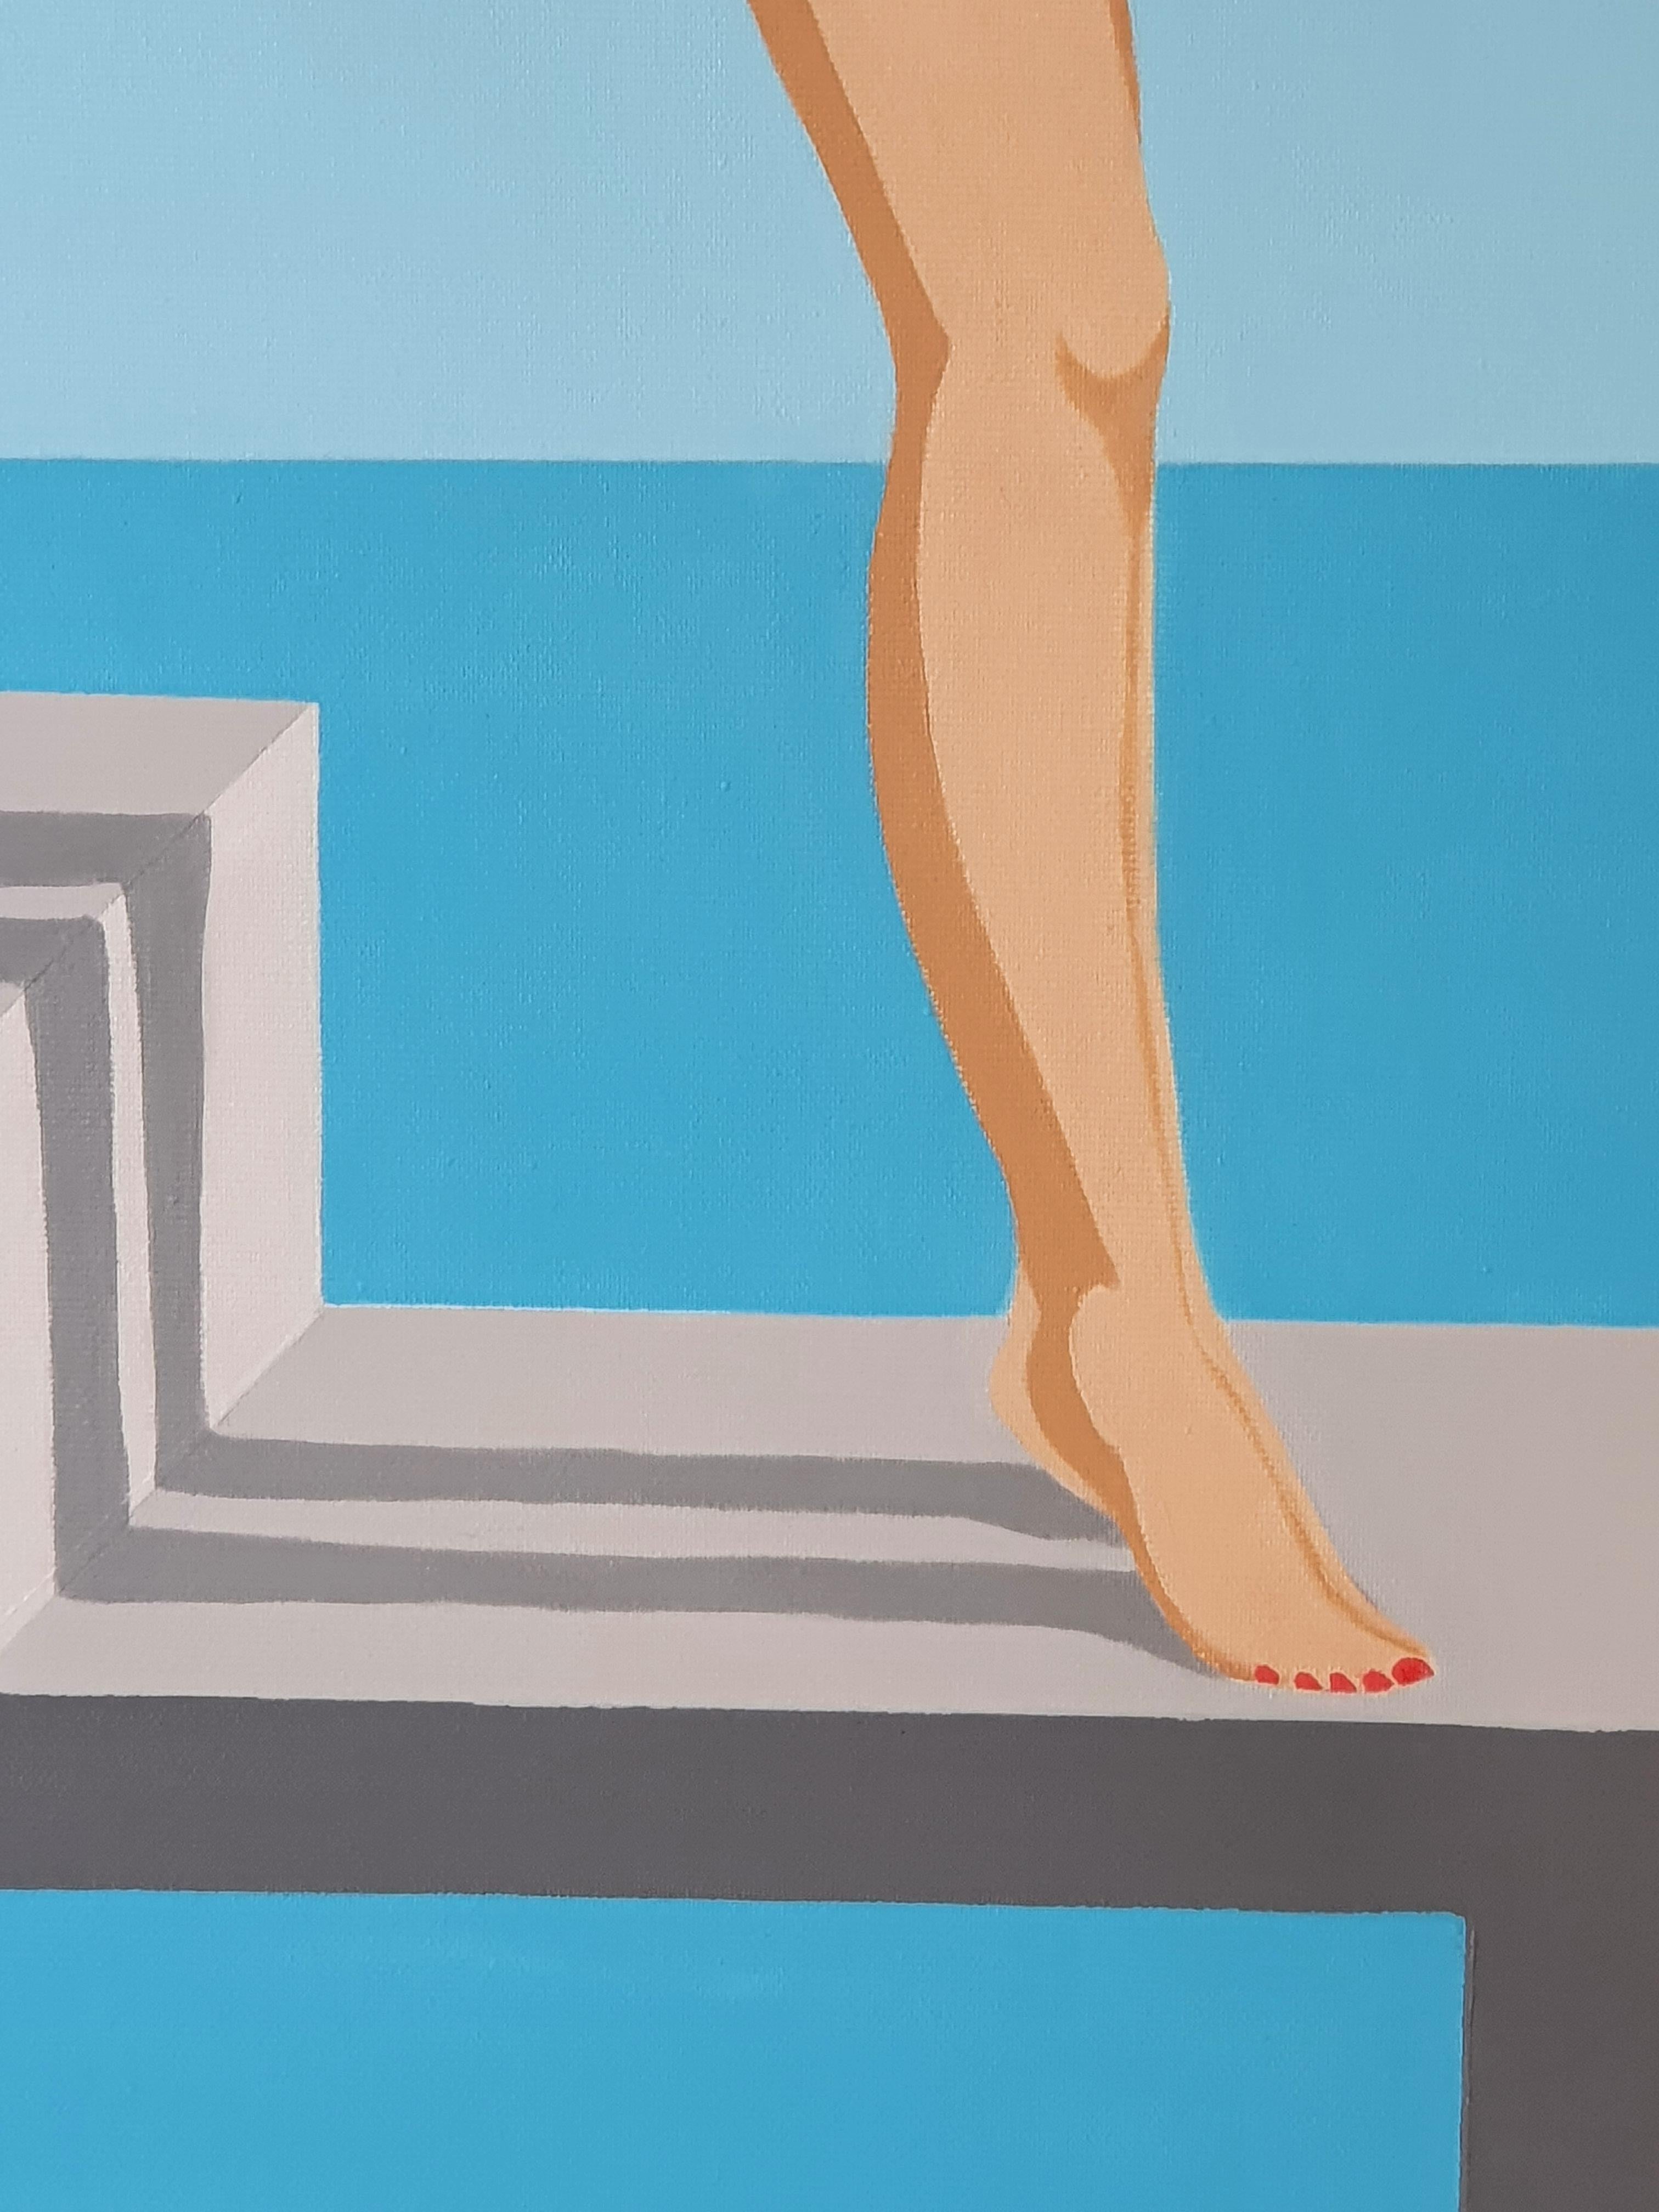 Stairway to heaven - contemporary minimalist painting 1